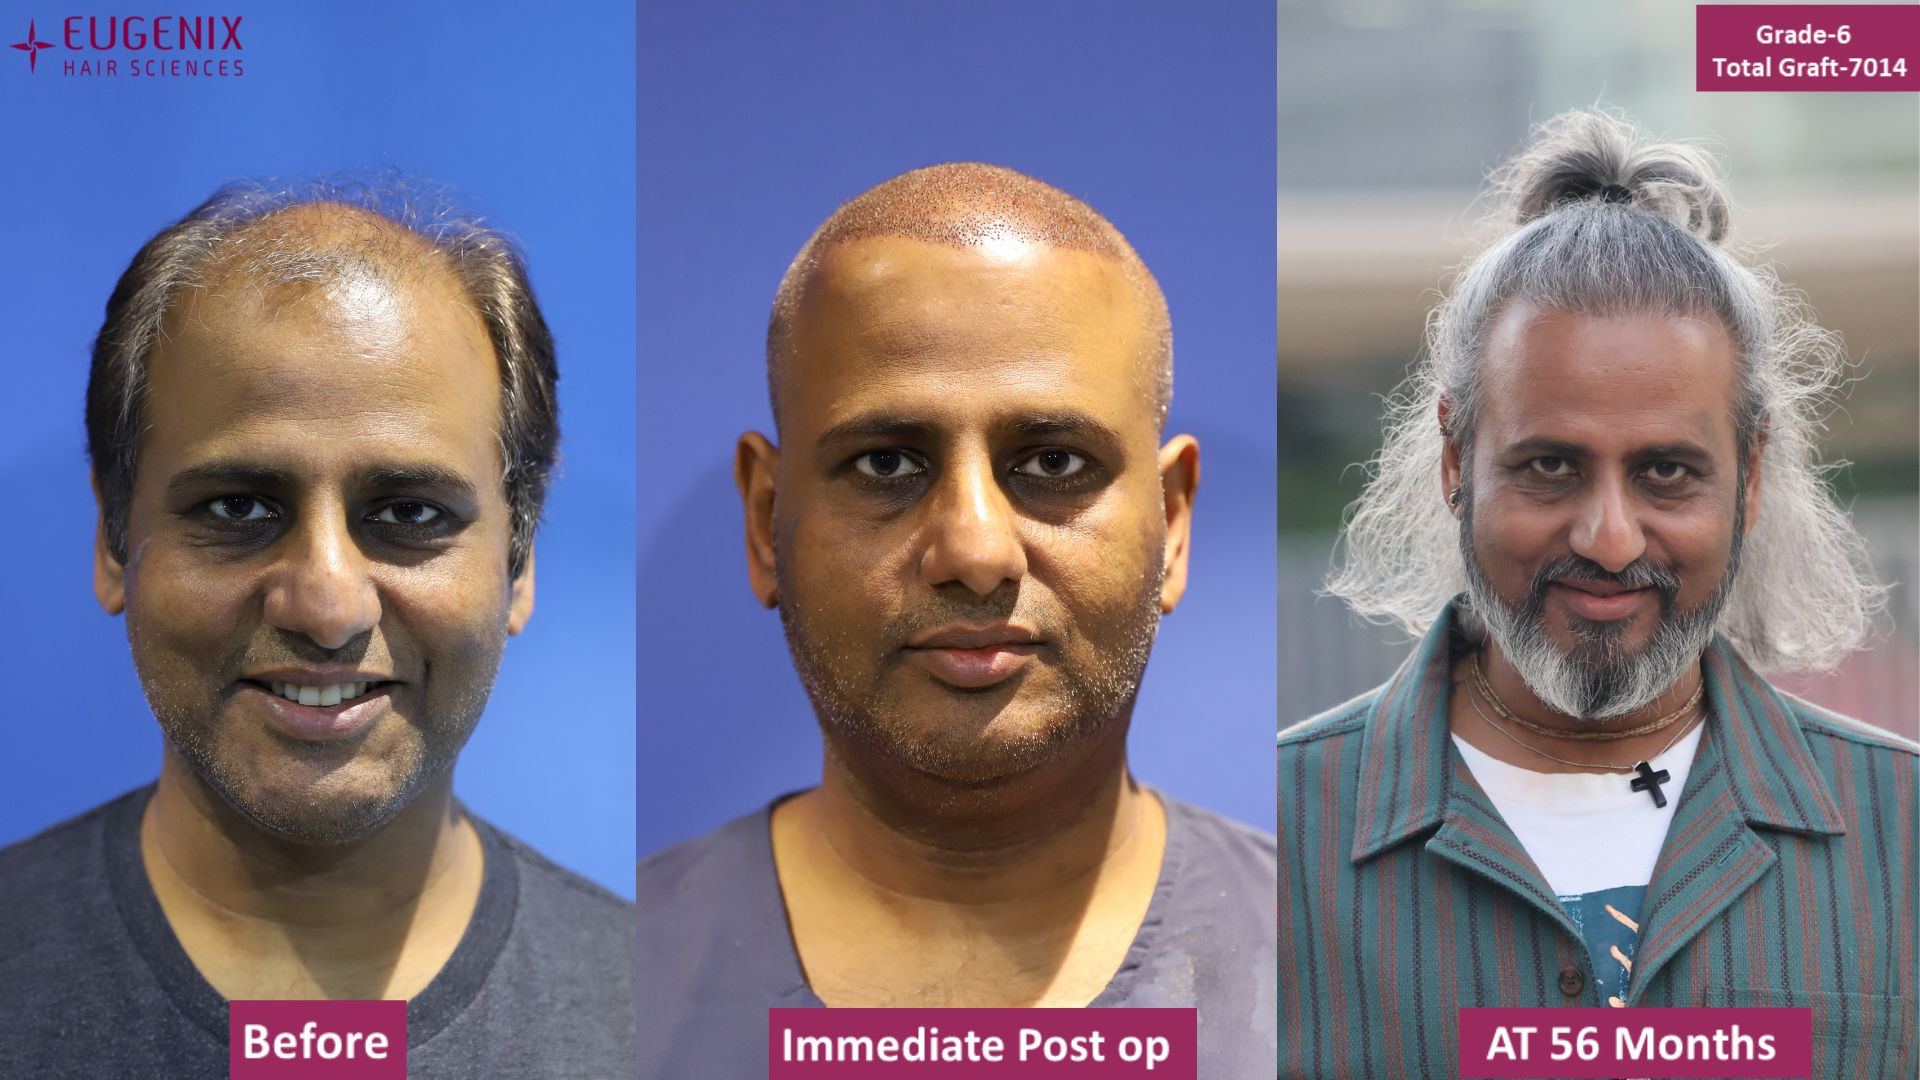 What is the cost of hair transplantation in Indore? - Quora